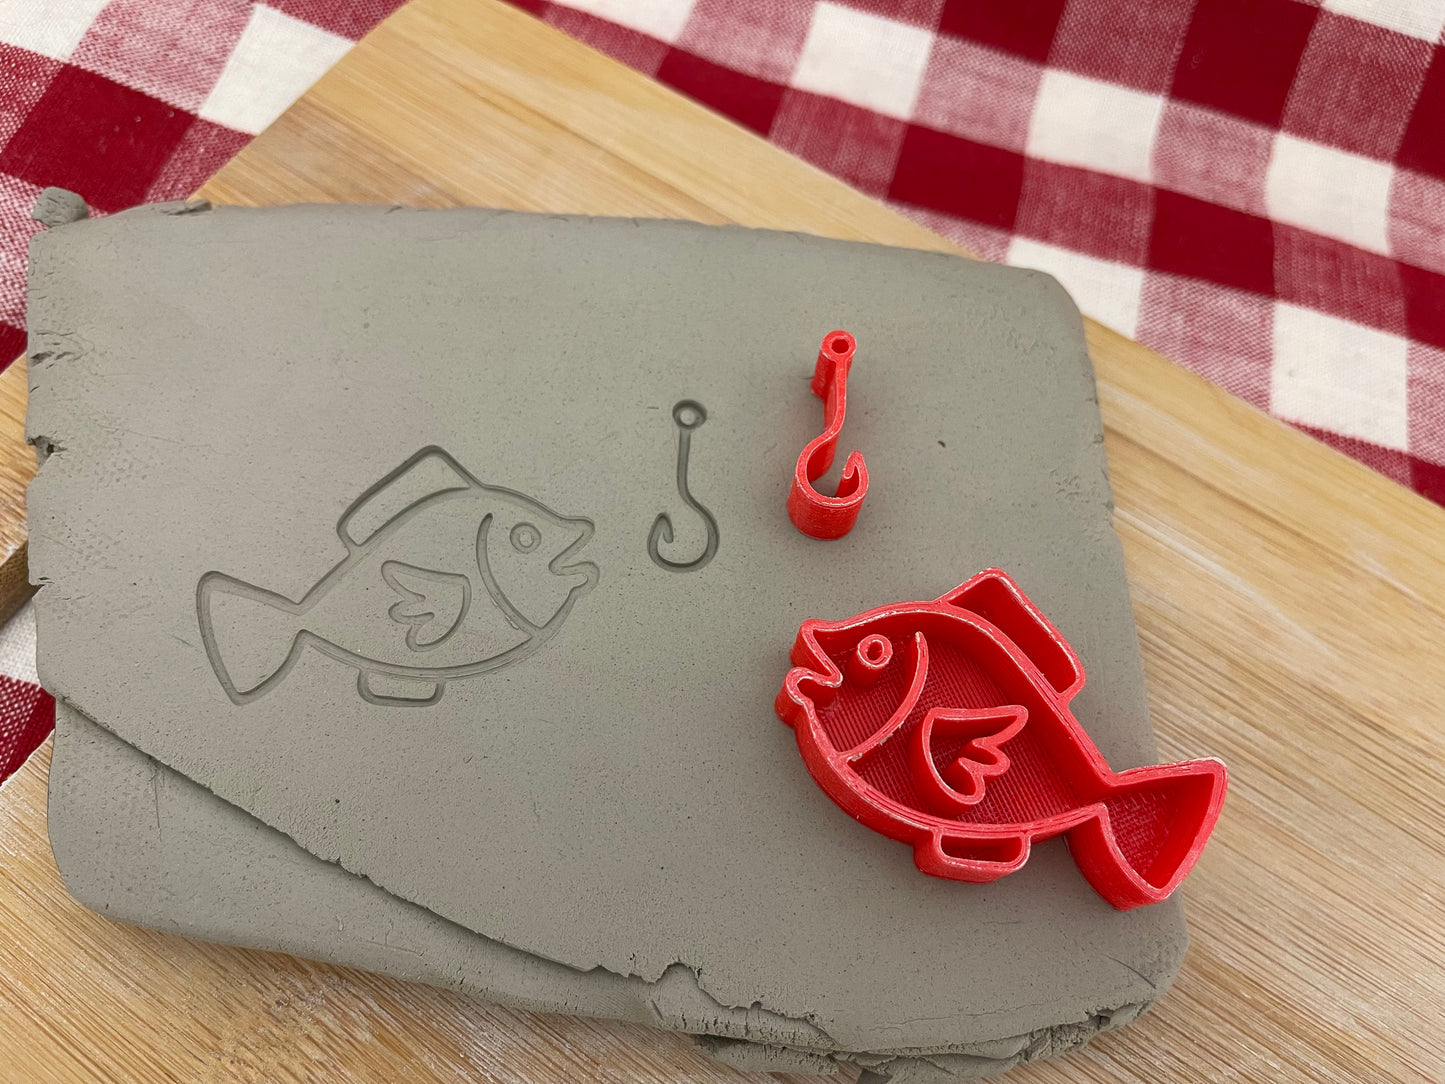 Pottery Stamp, Fish w/ hook, Fishing design, Camping doodle series - multiple sizes